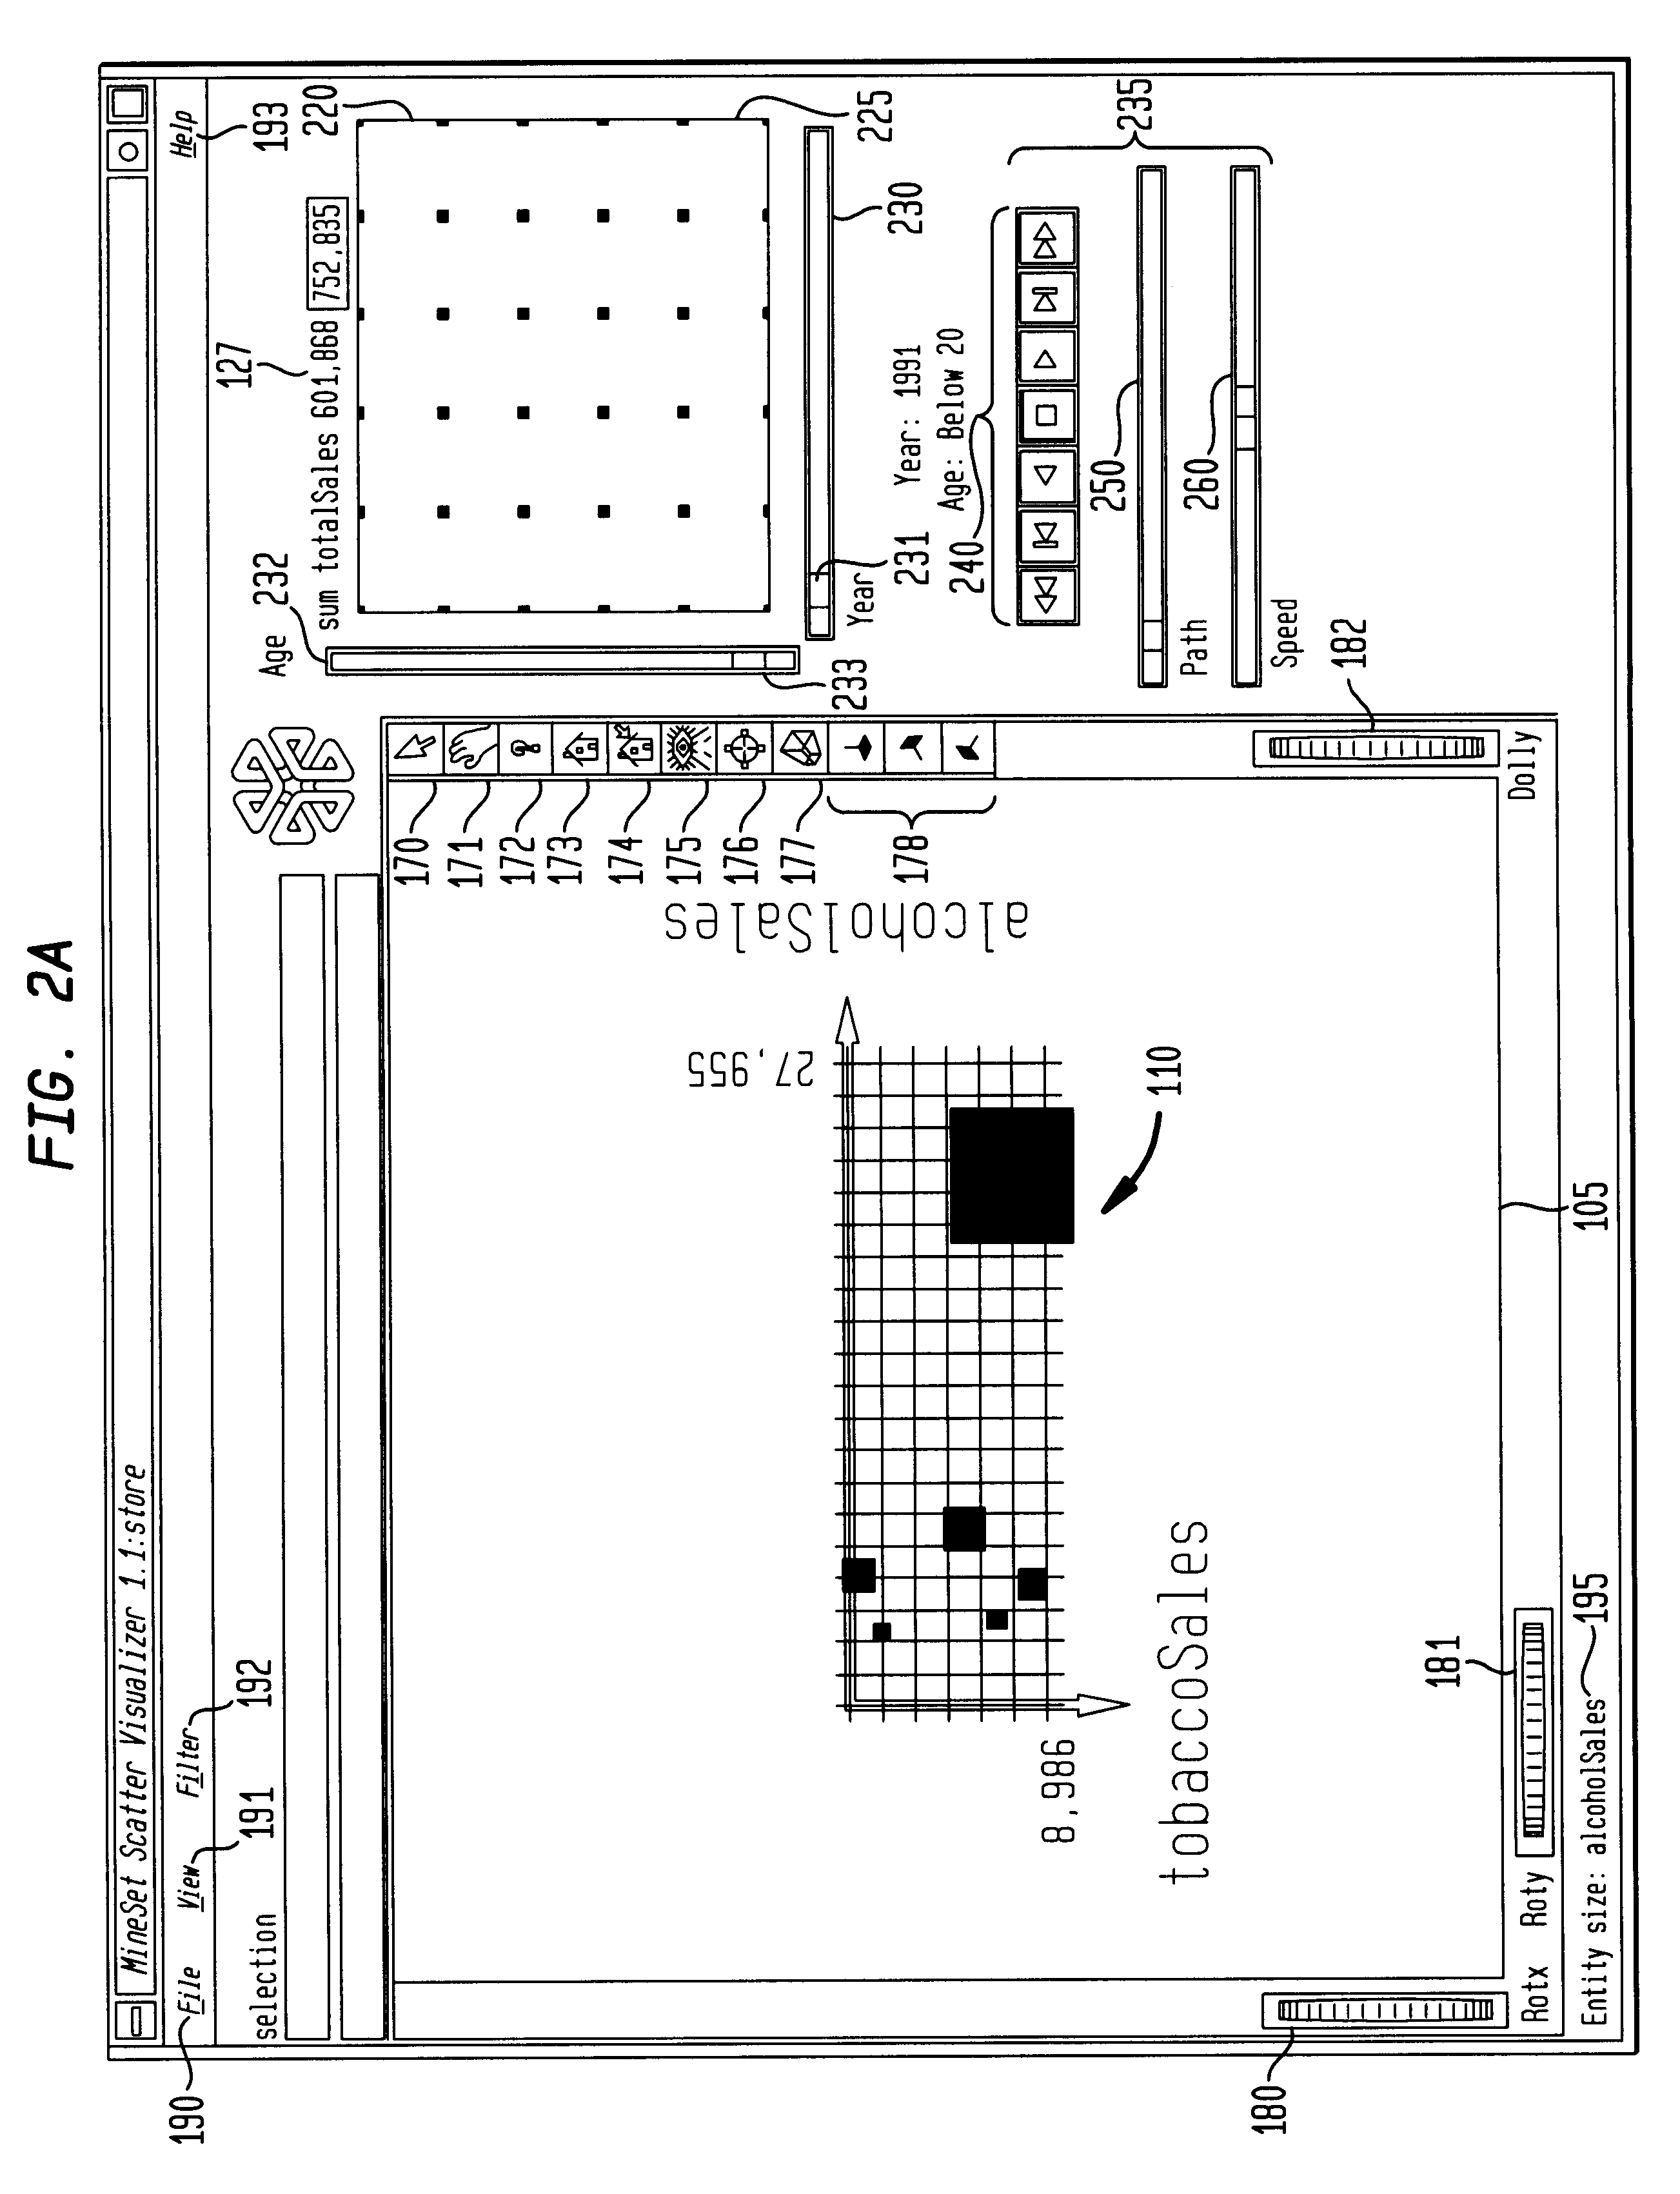 Computer-related method, system, and program product for controlling data visualization in external dimension(s)